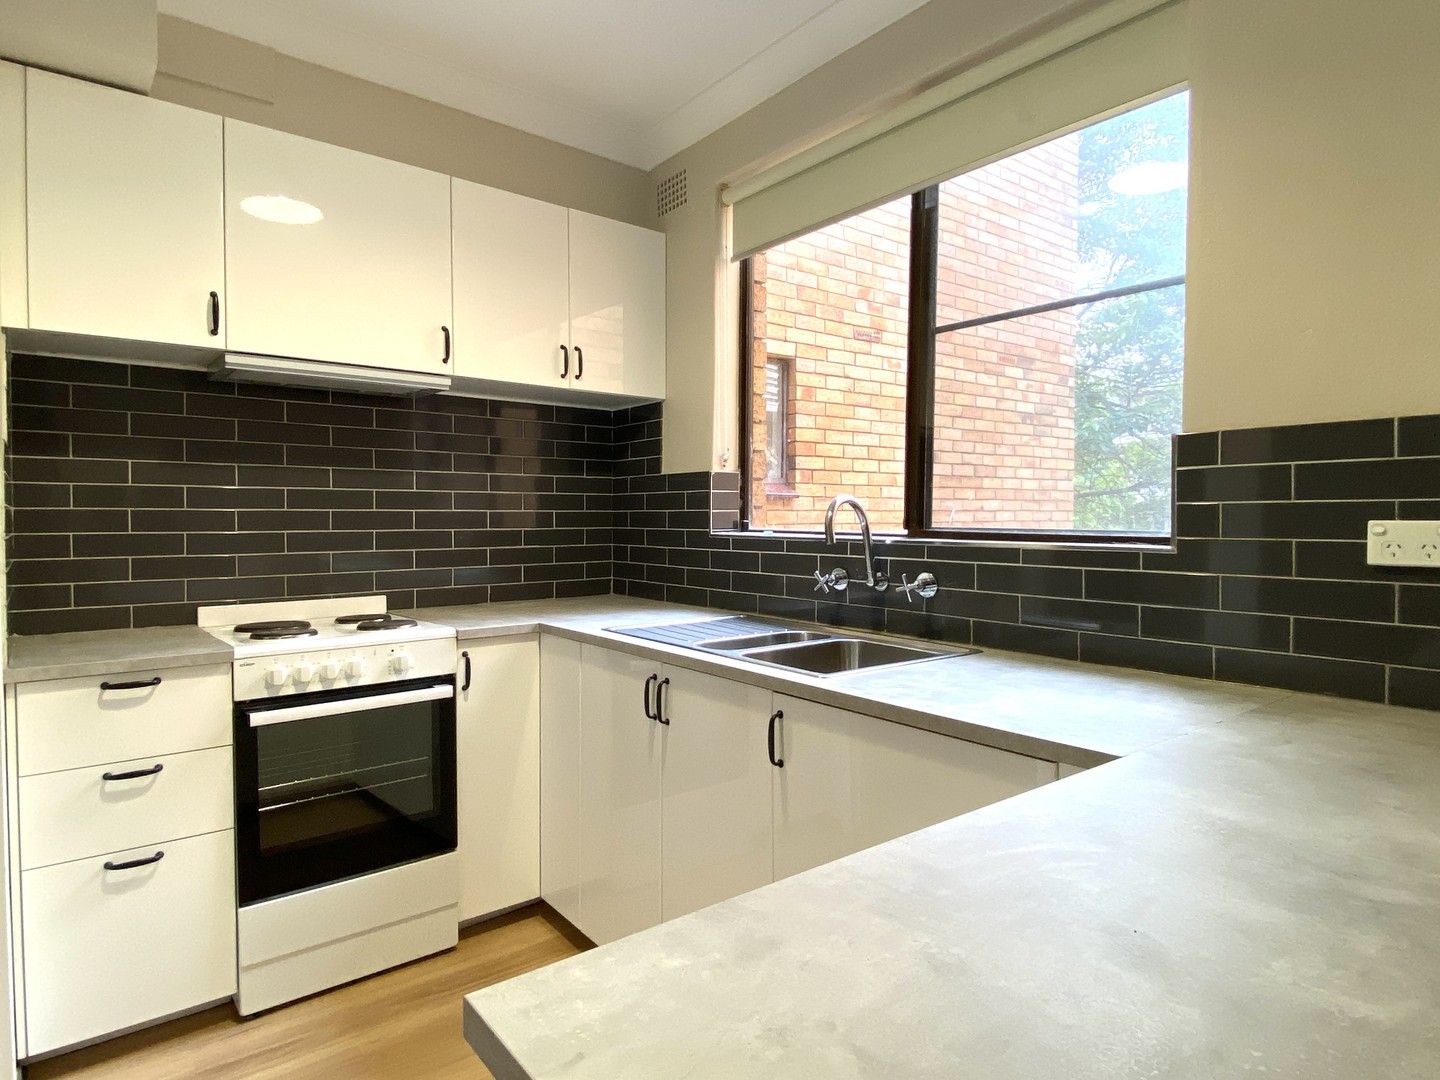 2 bedrooms Apartment / Unit / Flat in 9/20 Martin Place MORTDALE NSW, 2223